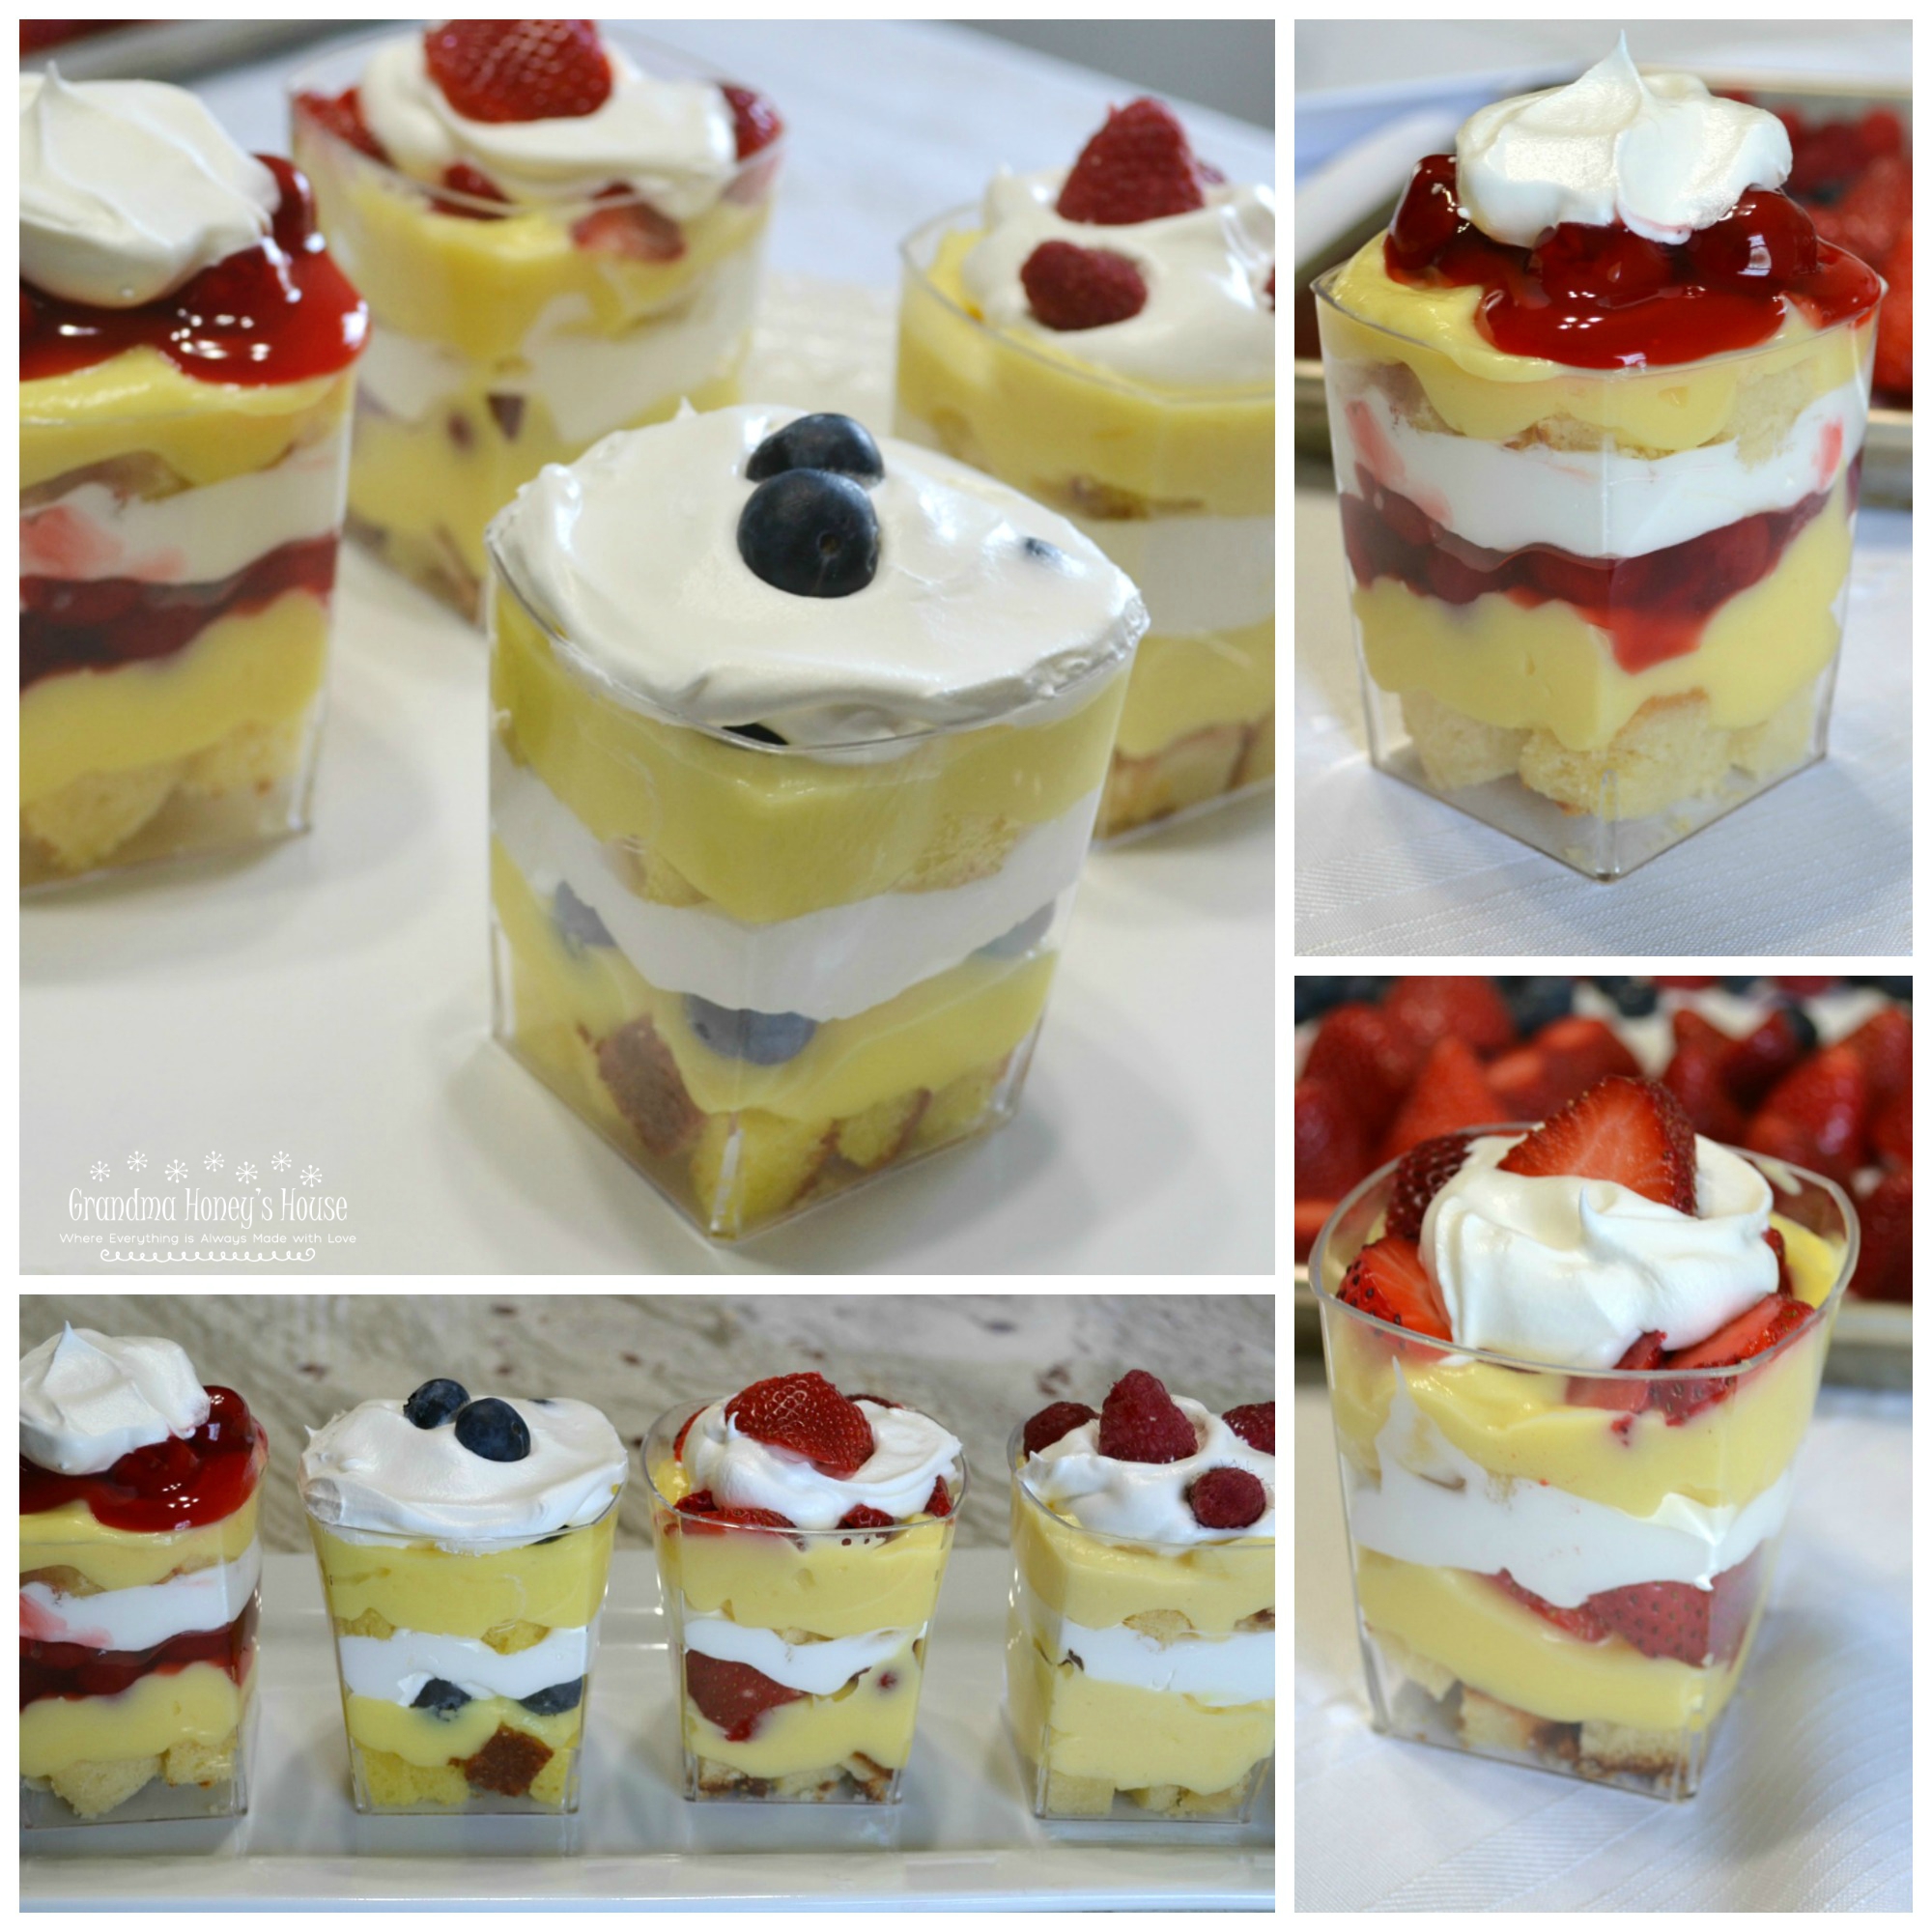 Punch Bowl Cake Cups are a delicious variation to the original punch bowl cake. Made in parfait cups for an easier dessert to enjoy.